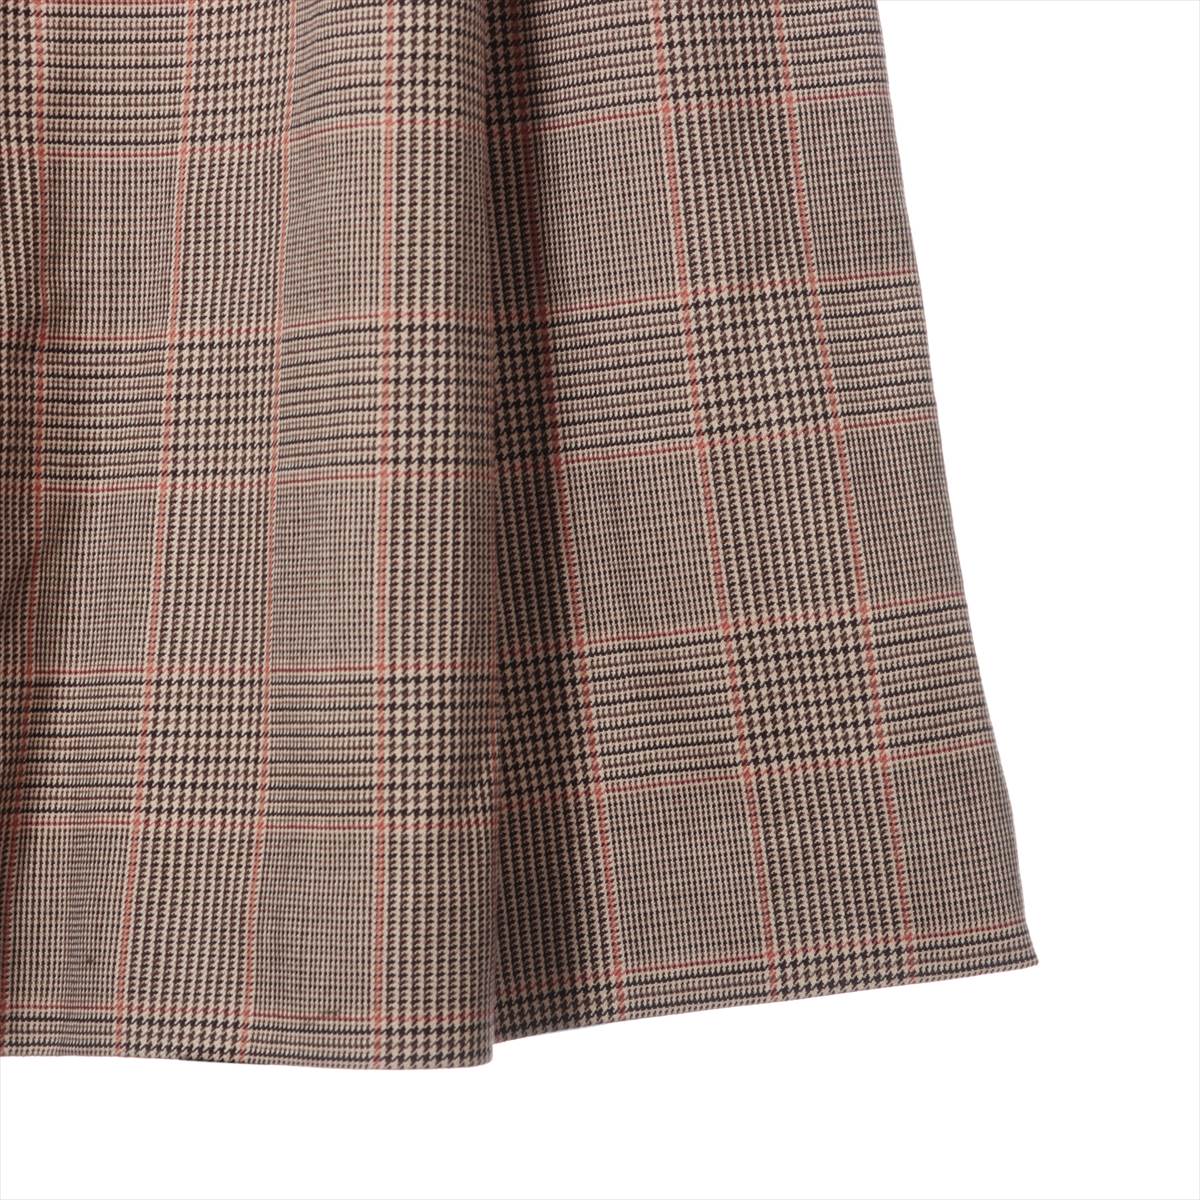 Celine 22SS Wool Skirt 38 Ladies' Brown  2J399012J Triomphe snap buttons Hedi Period with hanger